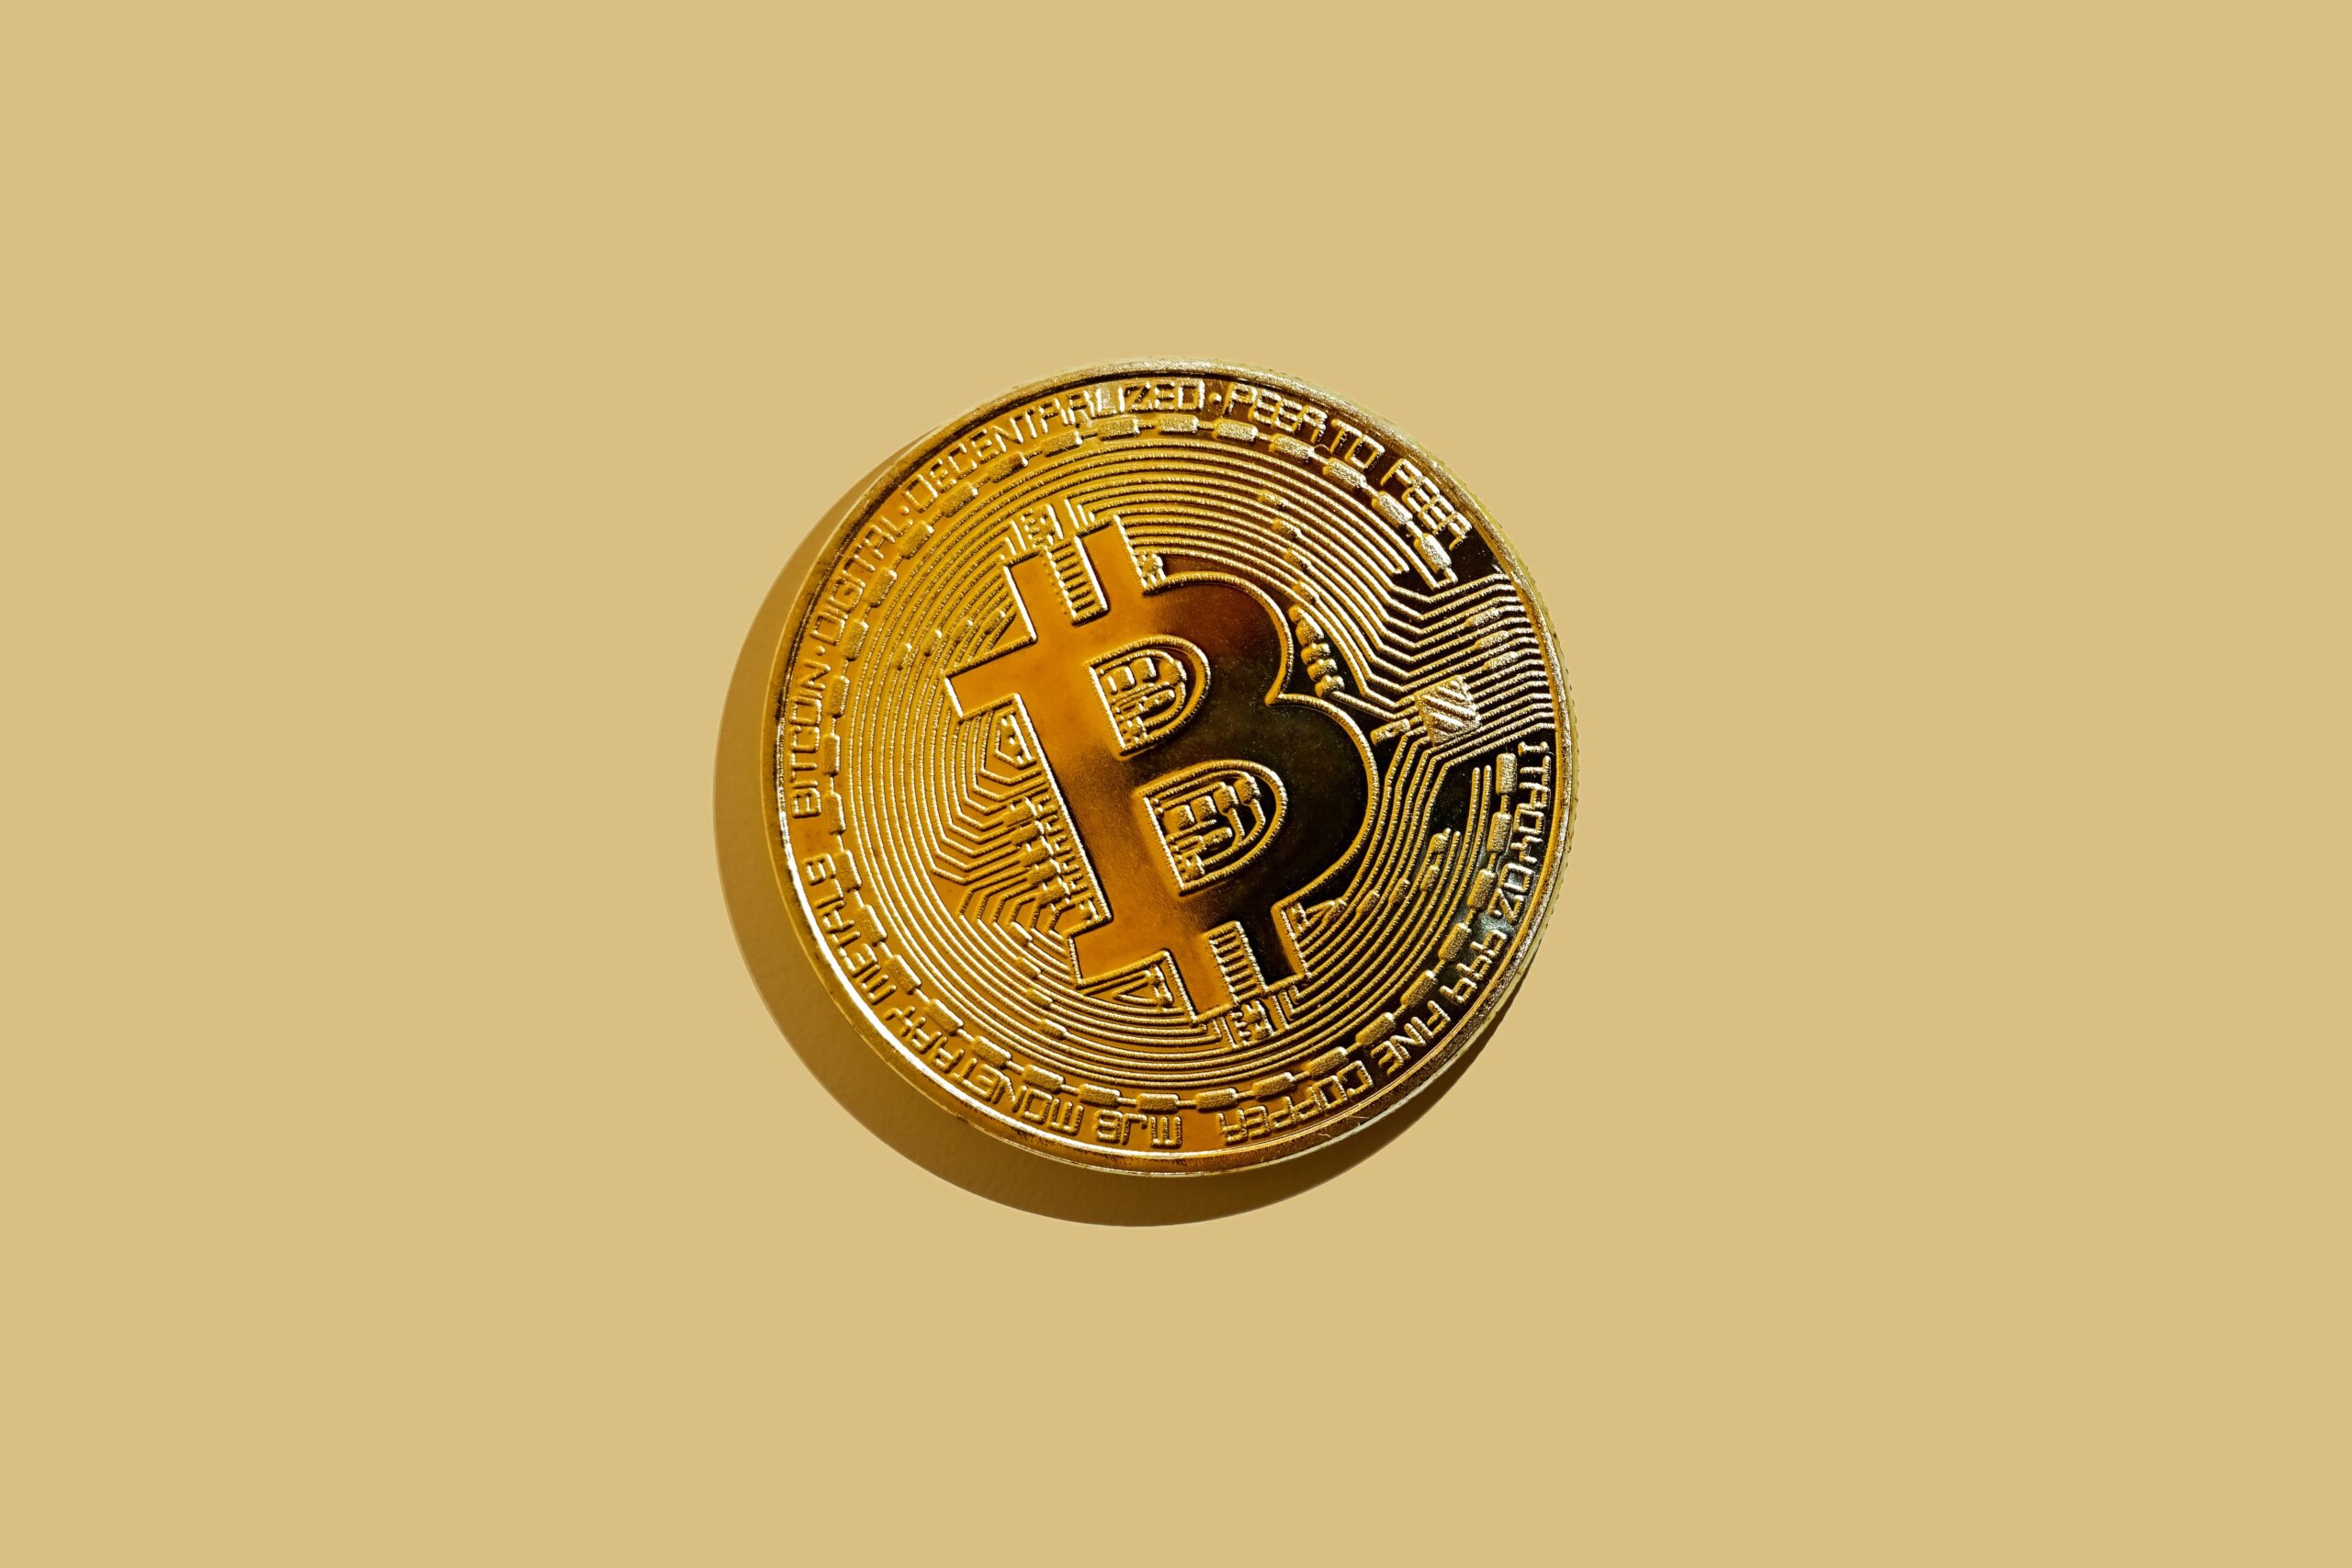 image of physical depiction of a bitcoin (gold coin)